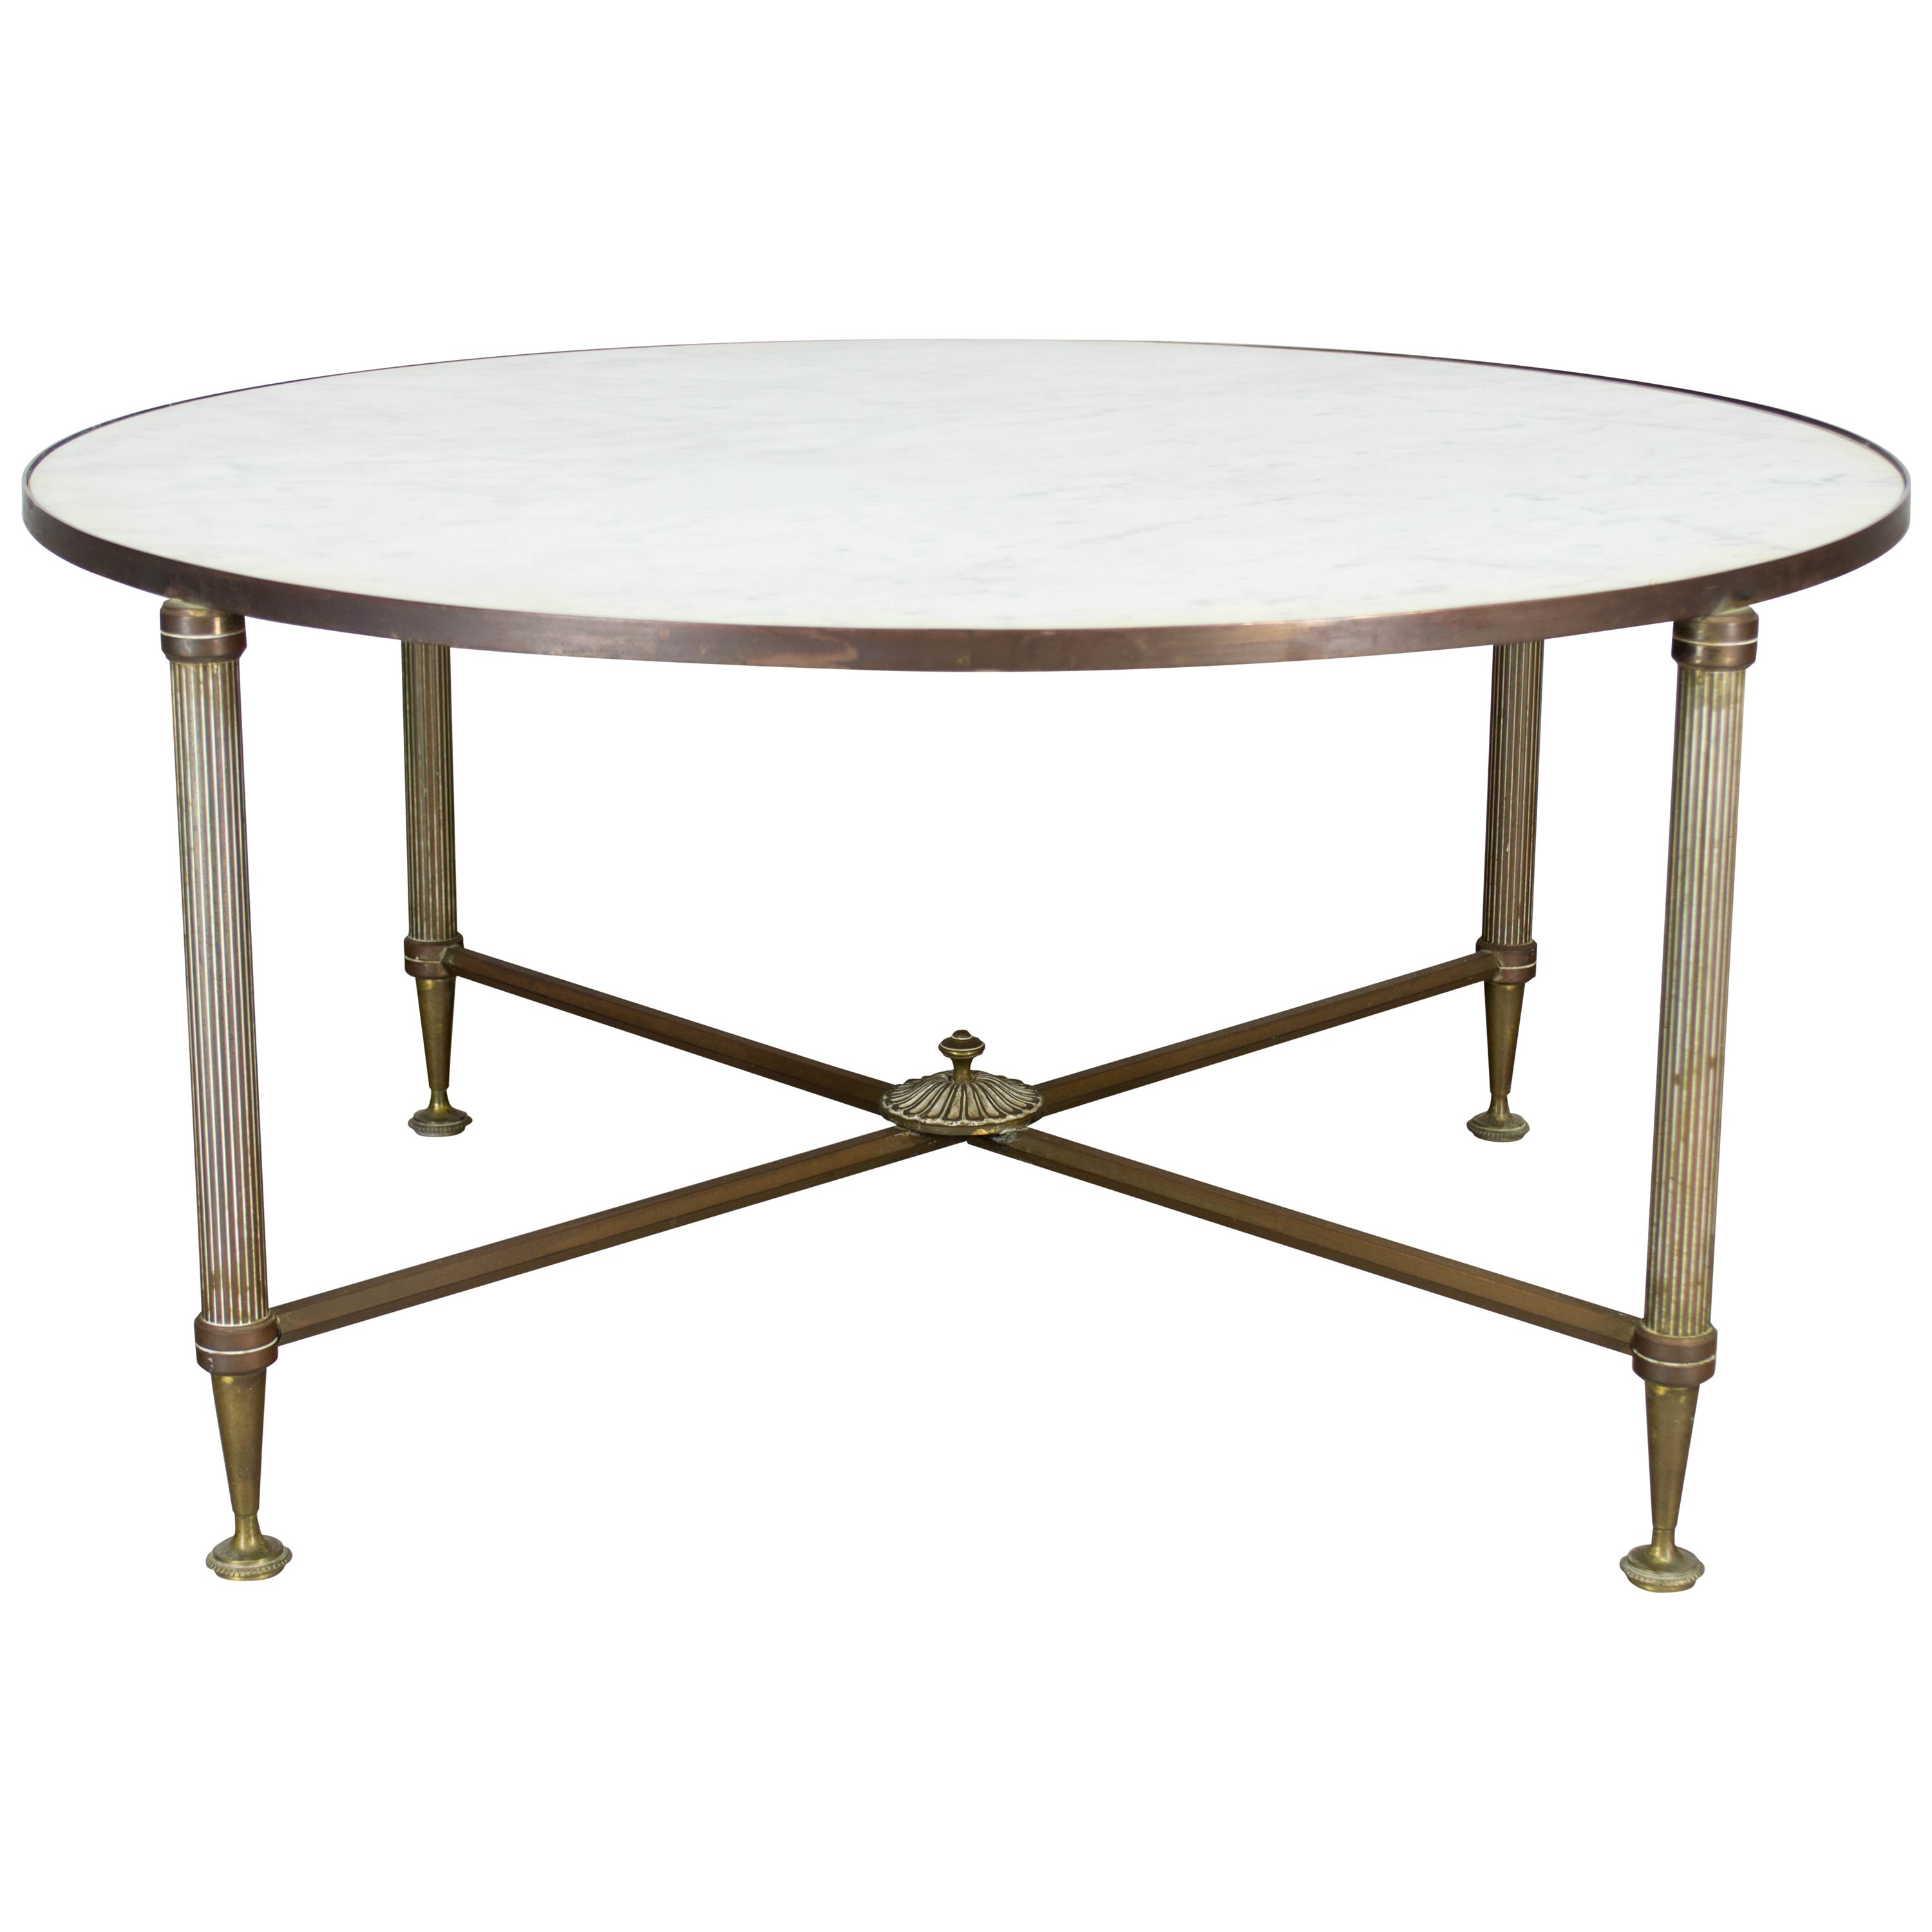 French Moderne Cocktail Table